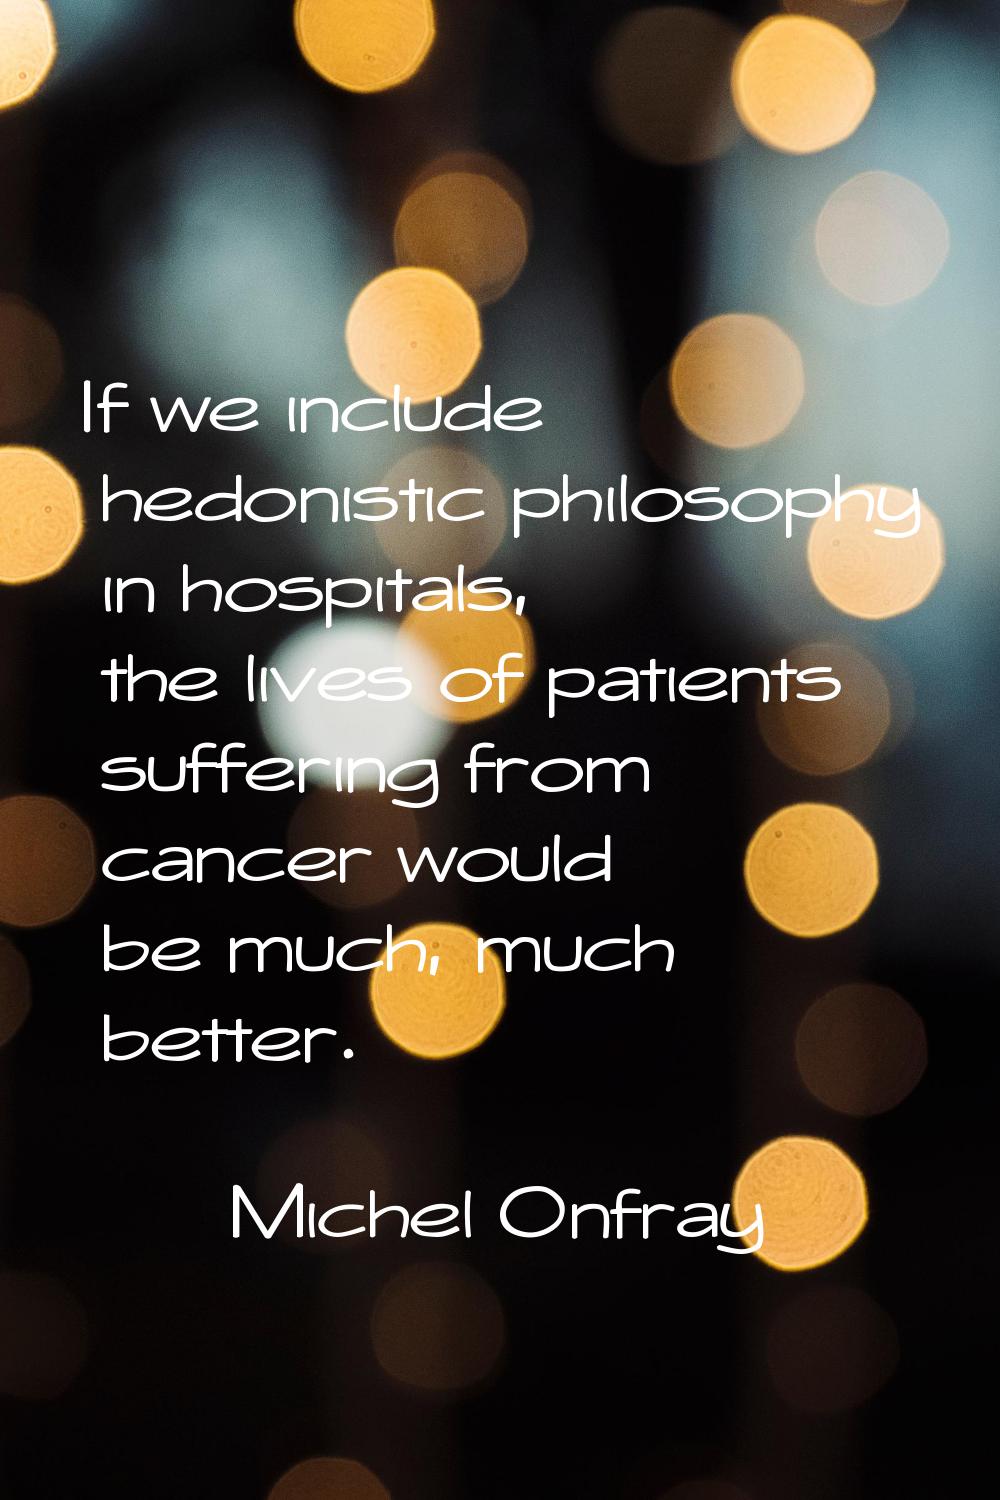 If we include hedonistic philosophy in hospitals, the lives of patients suffering from cancer would